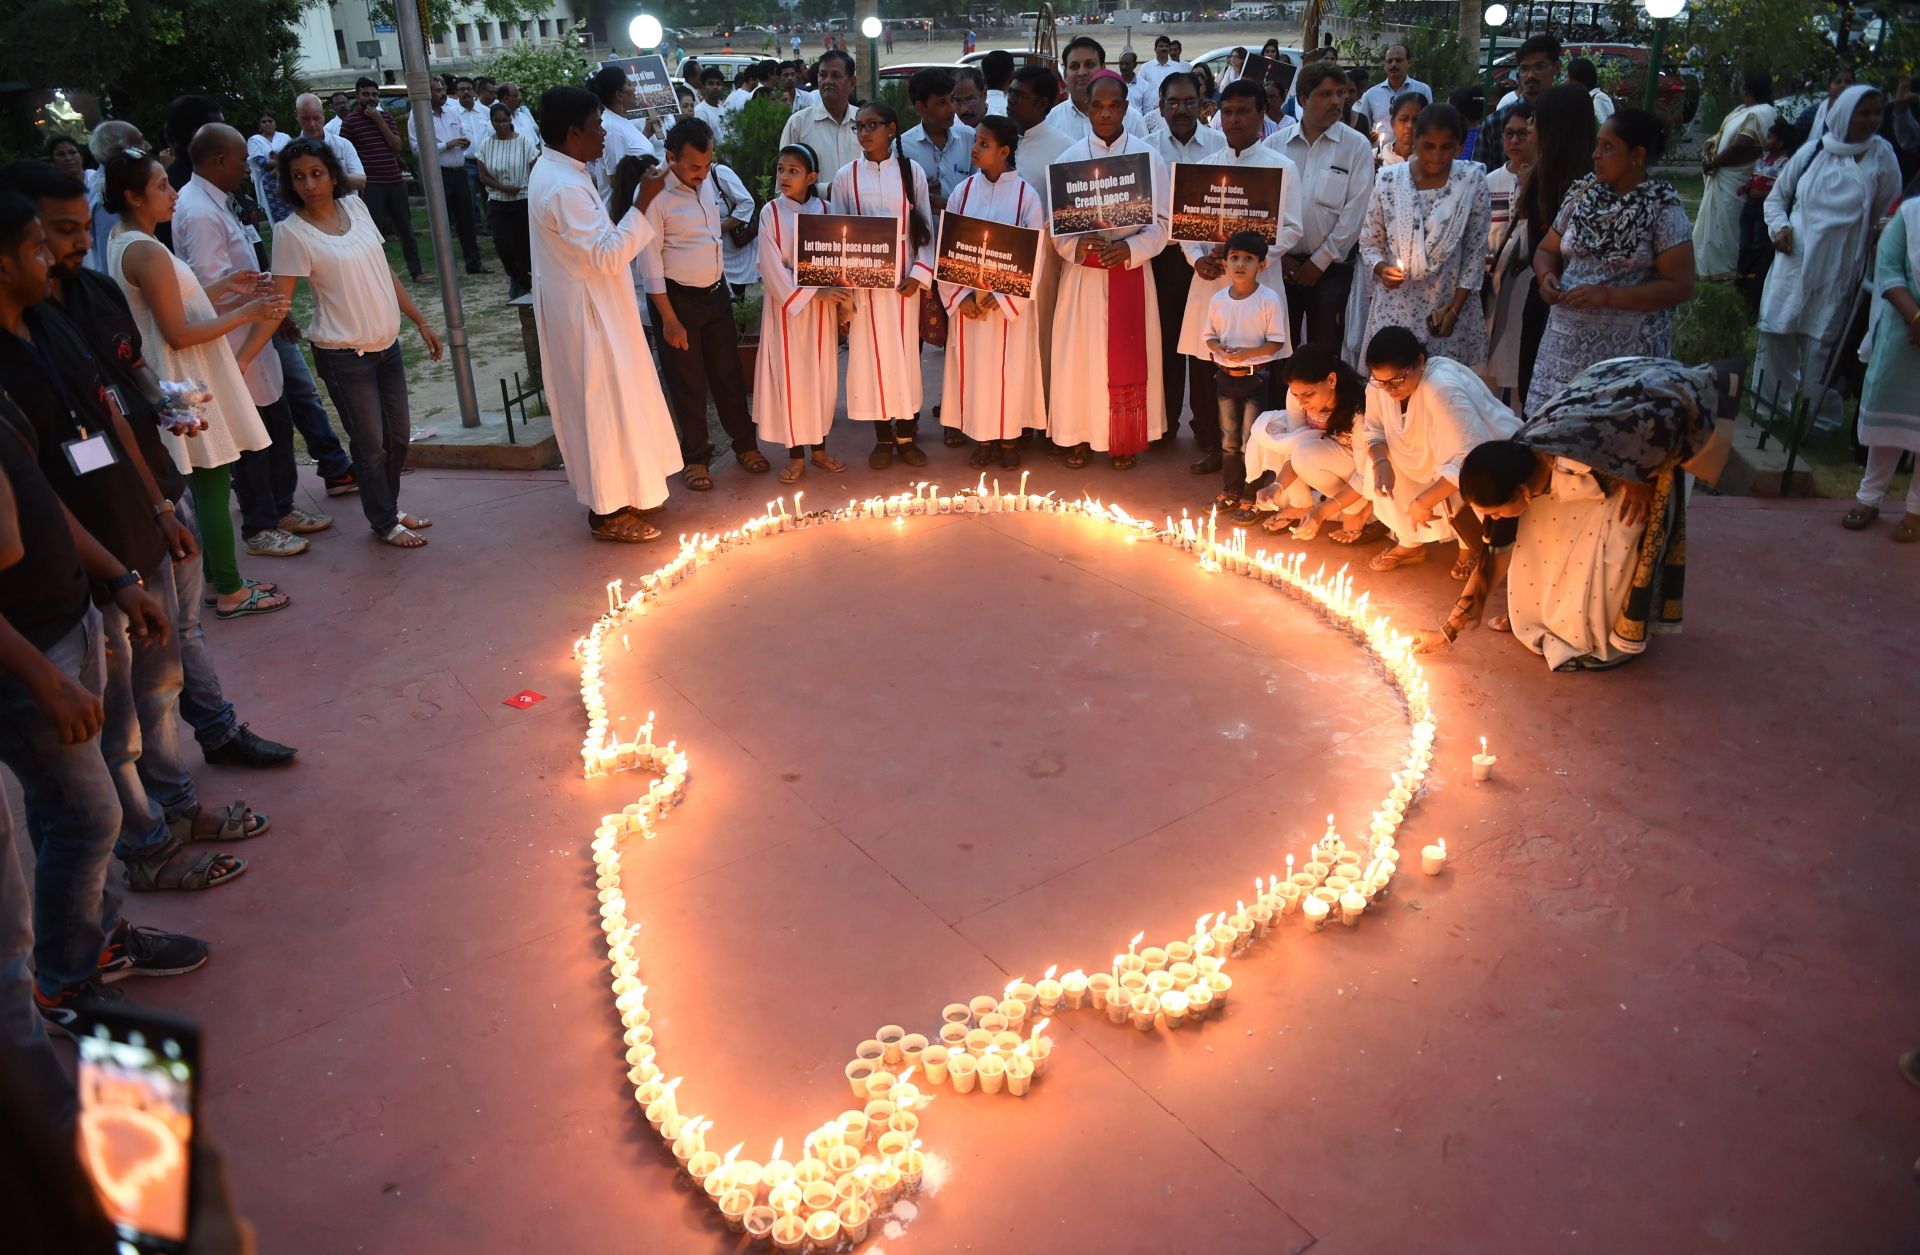 Candles in the shape of Sri Lanka on April 29 in Ahmedabad, India.